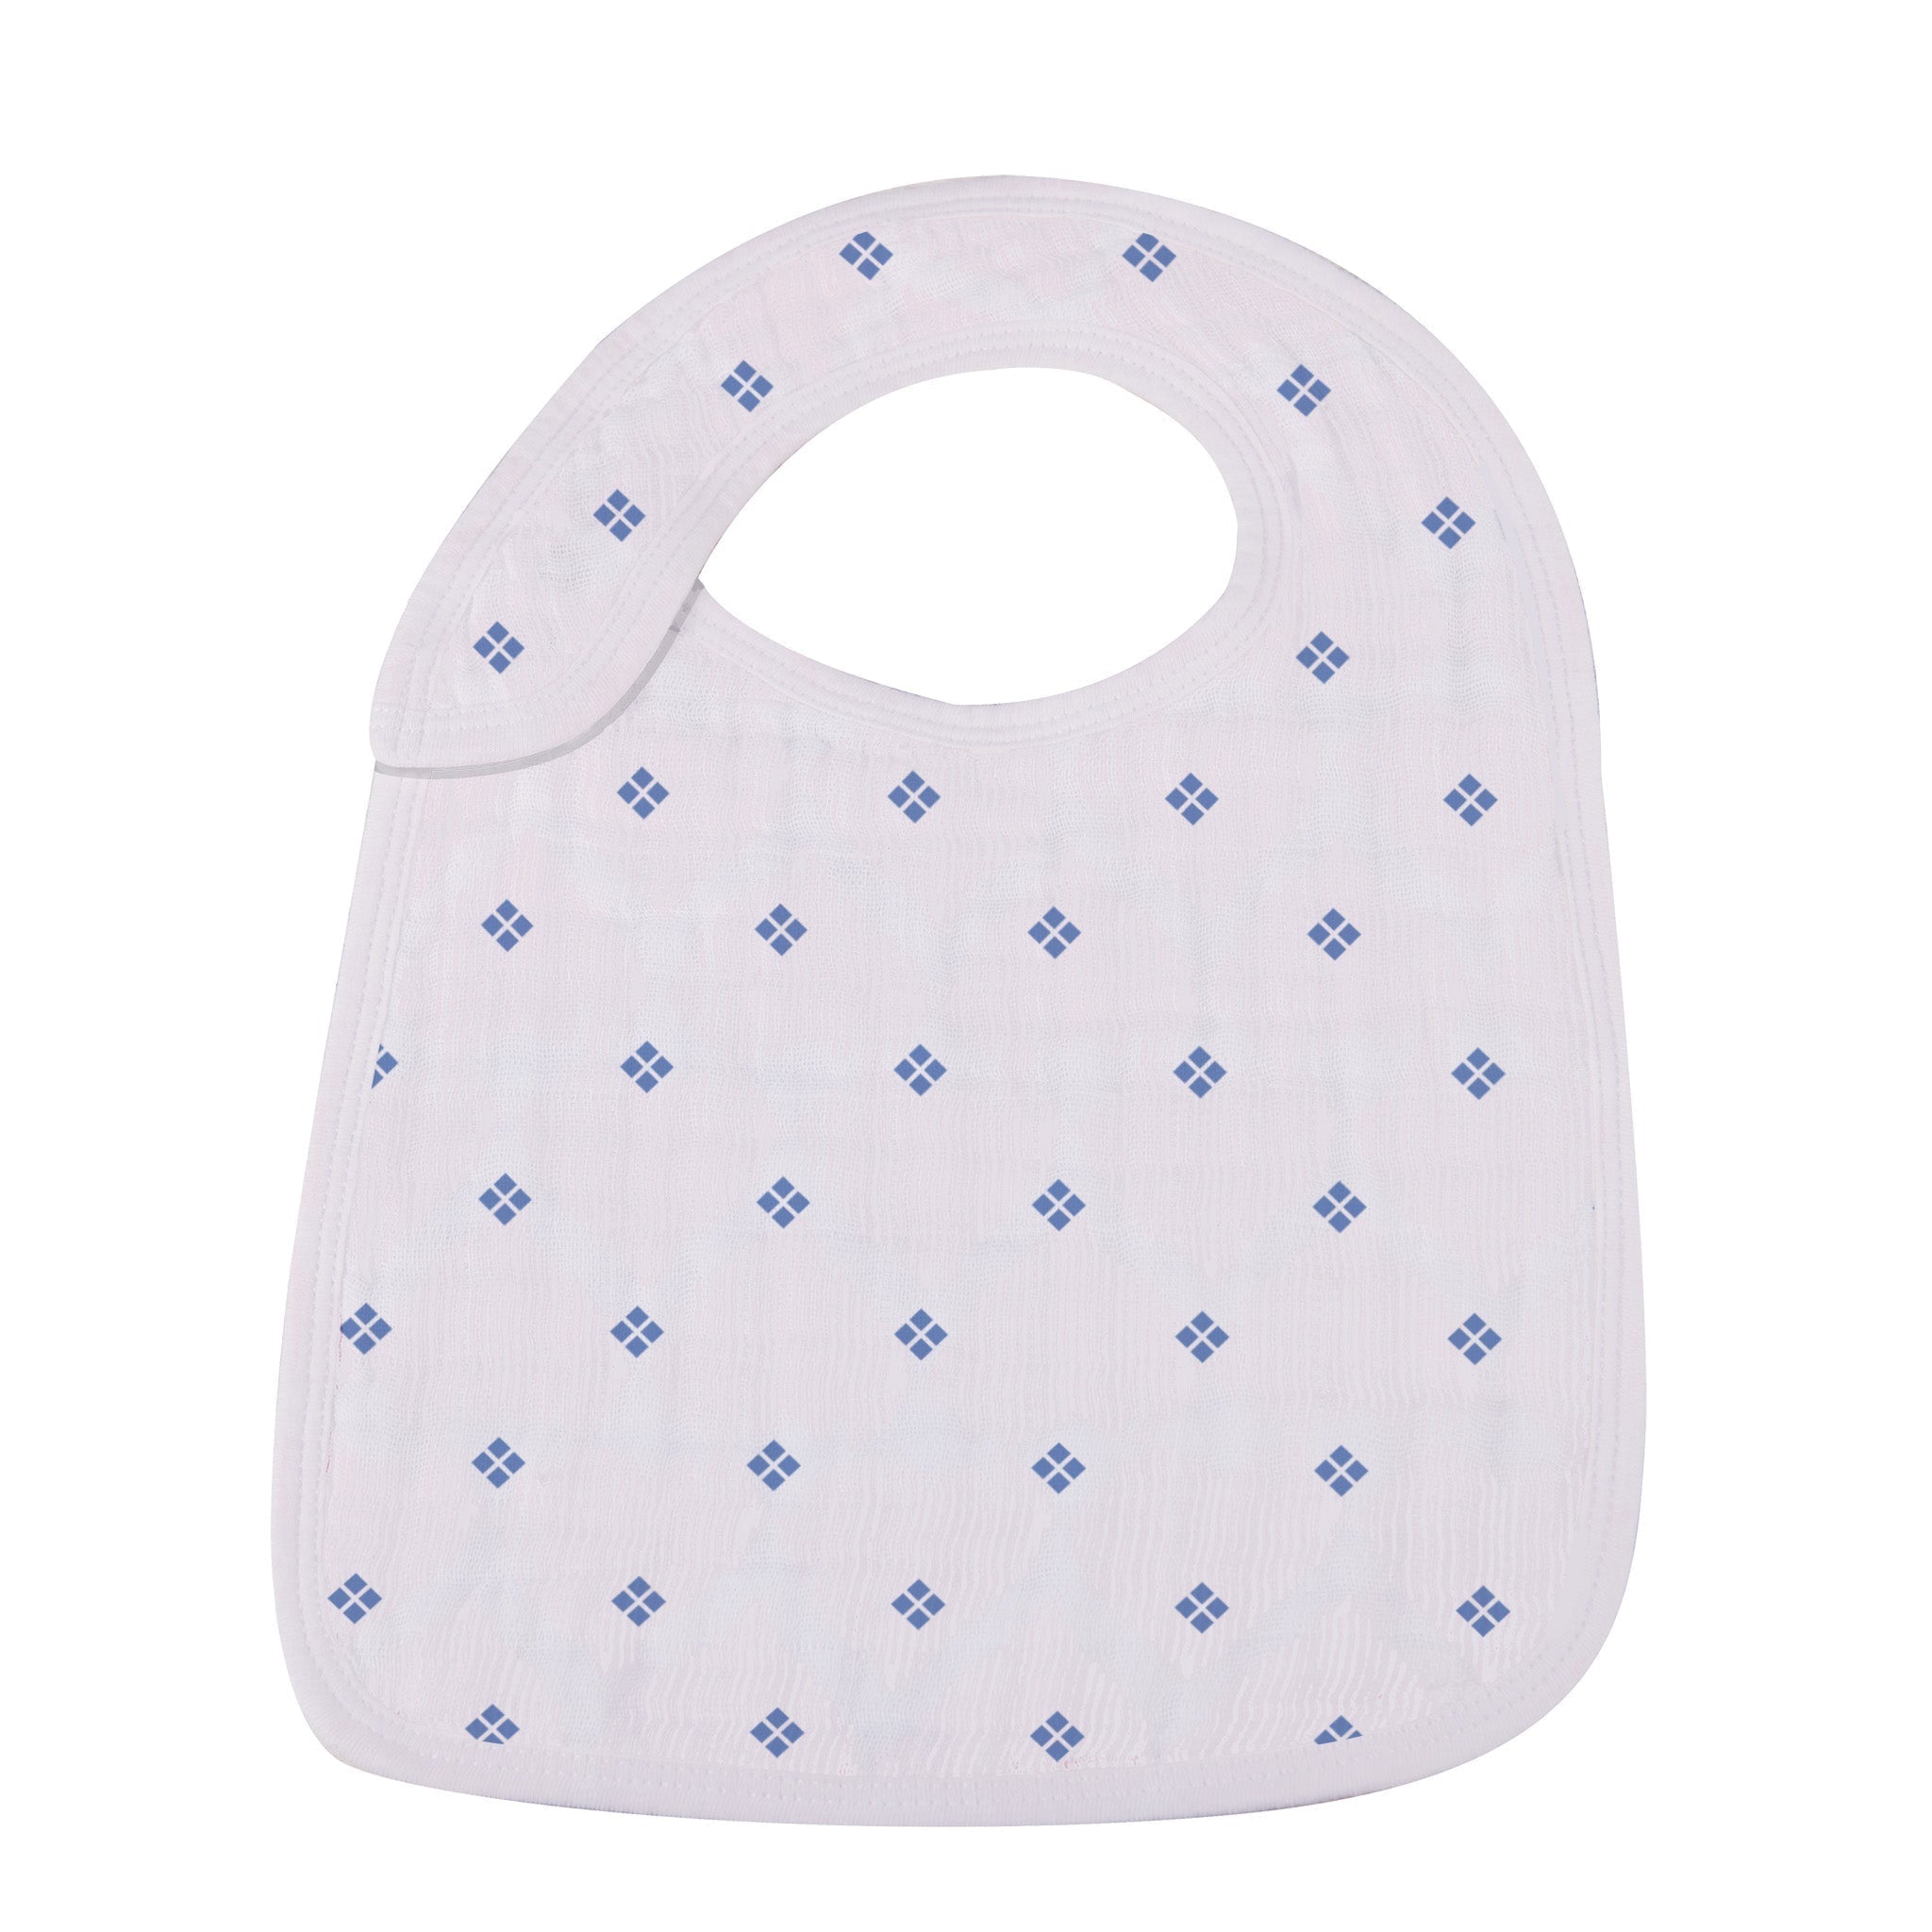 Back side of a snap bib for babies